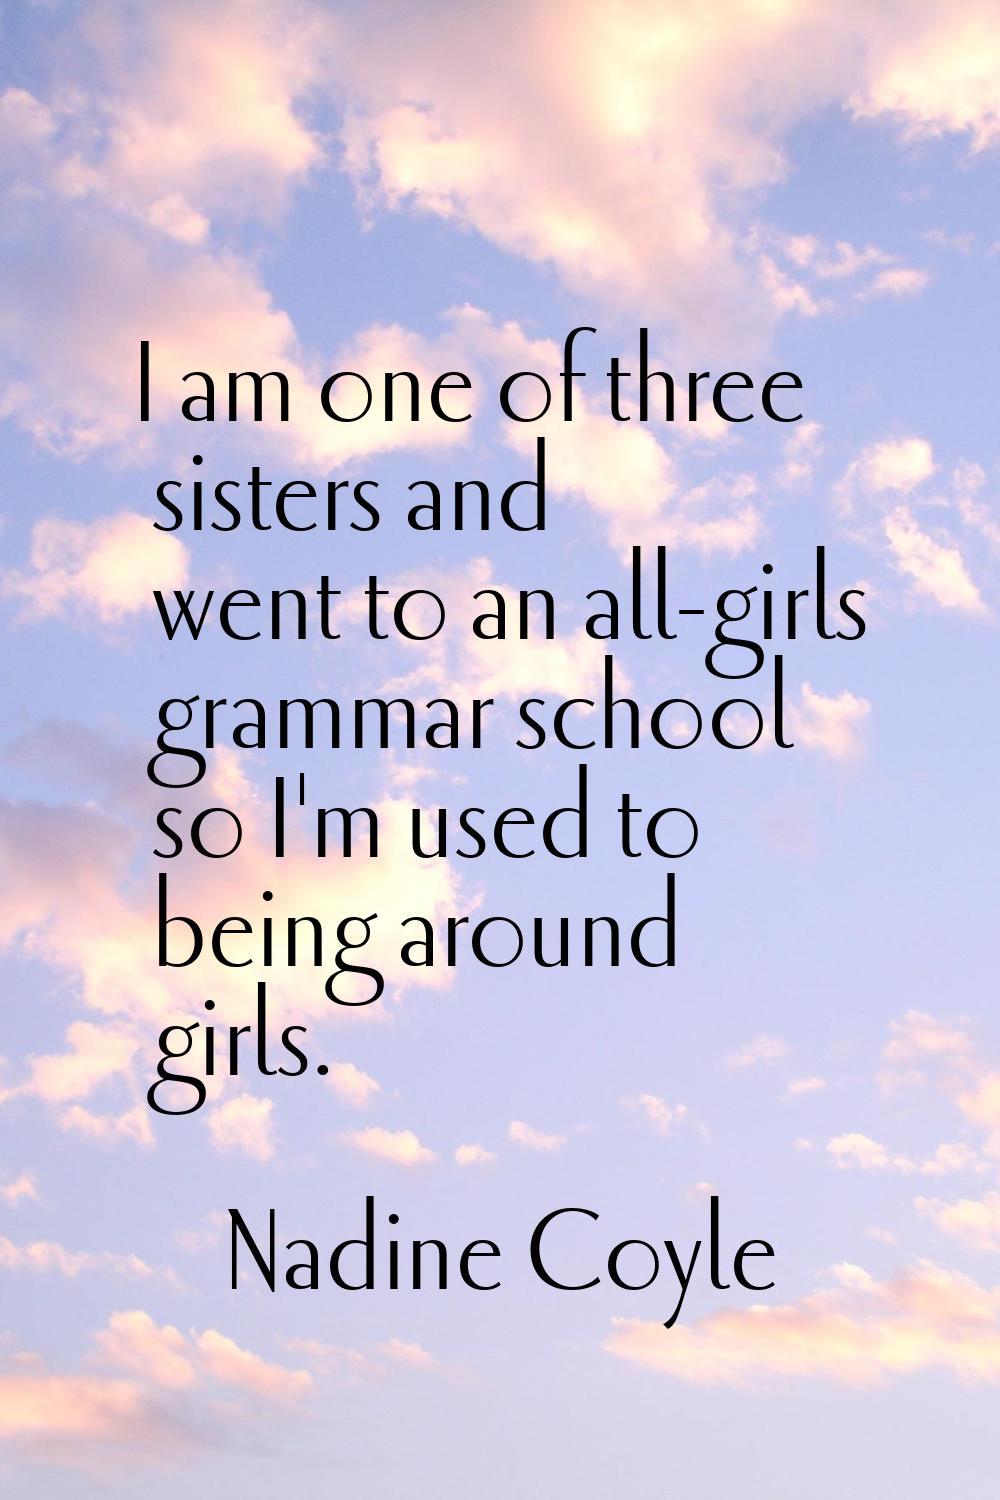 I am one of three sisters and went to an all-girls grammar school so I'm used to being around girls